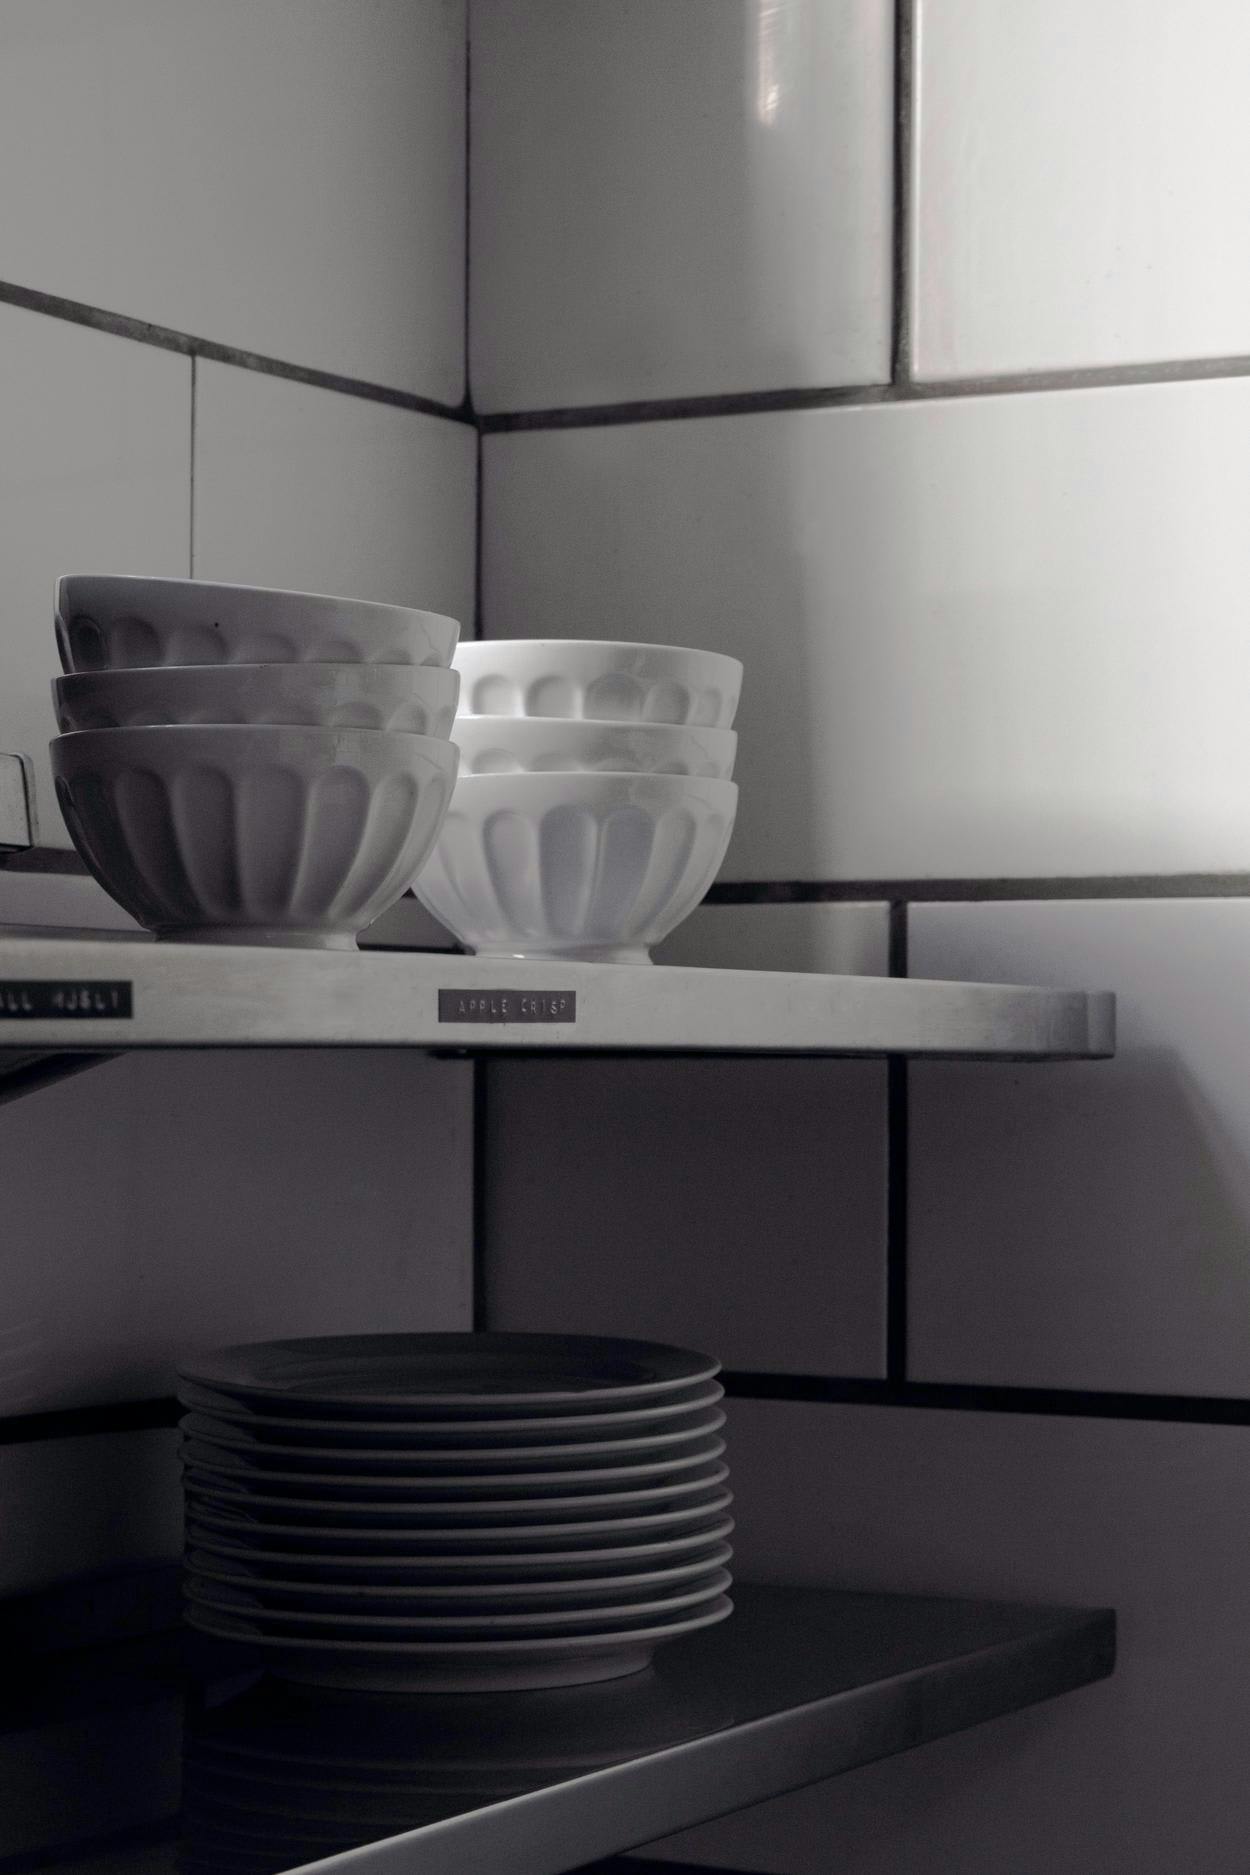 The image features a white kitchen counter with a variety of white bowls and plates arranged on it.